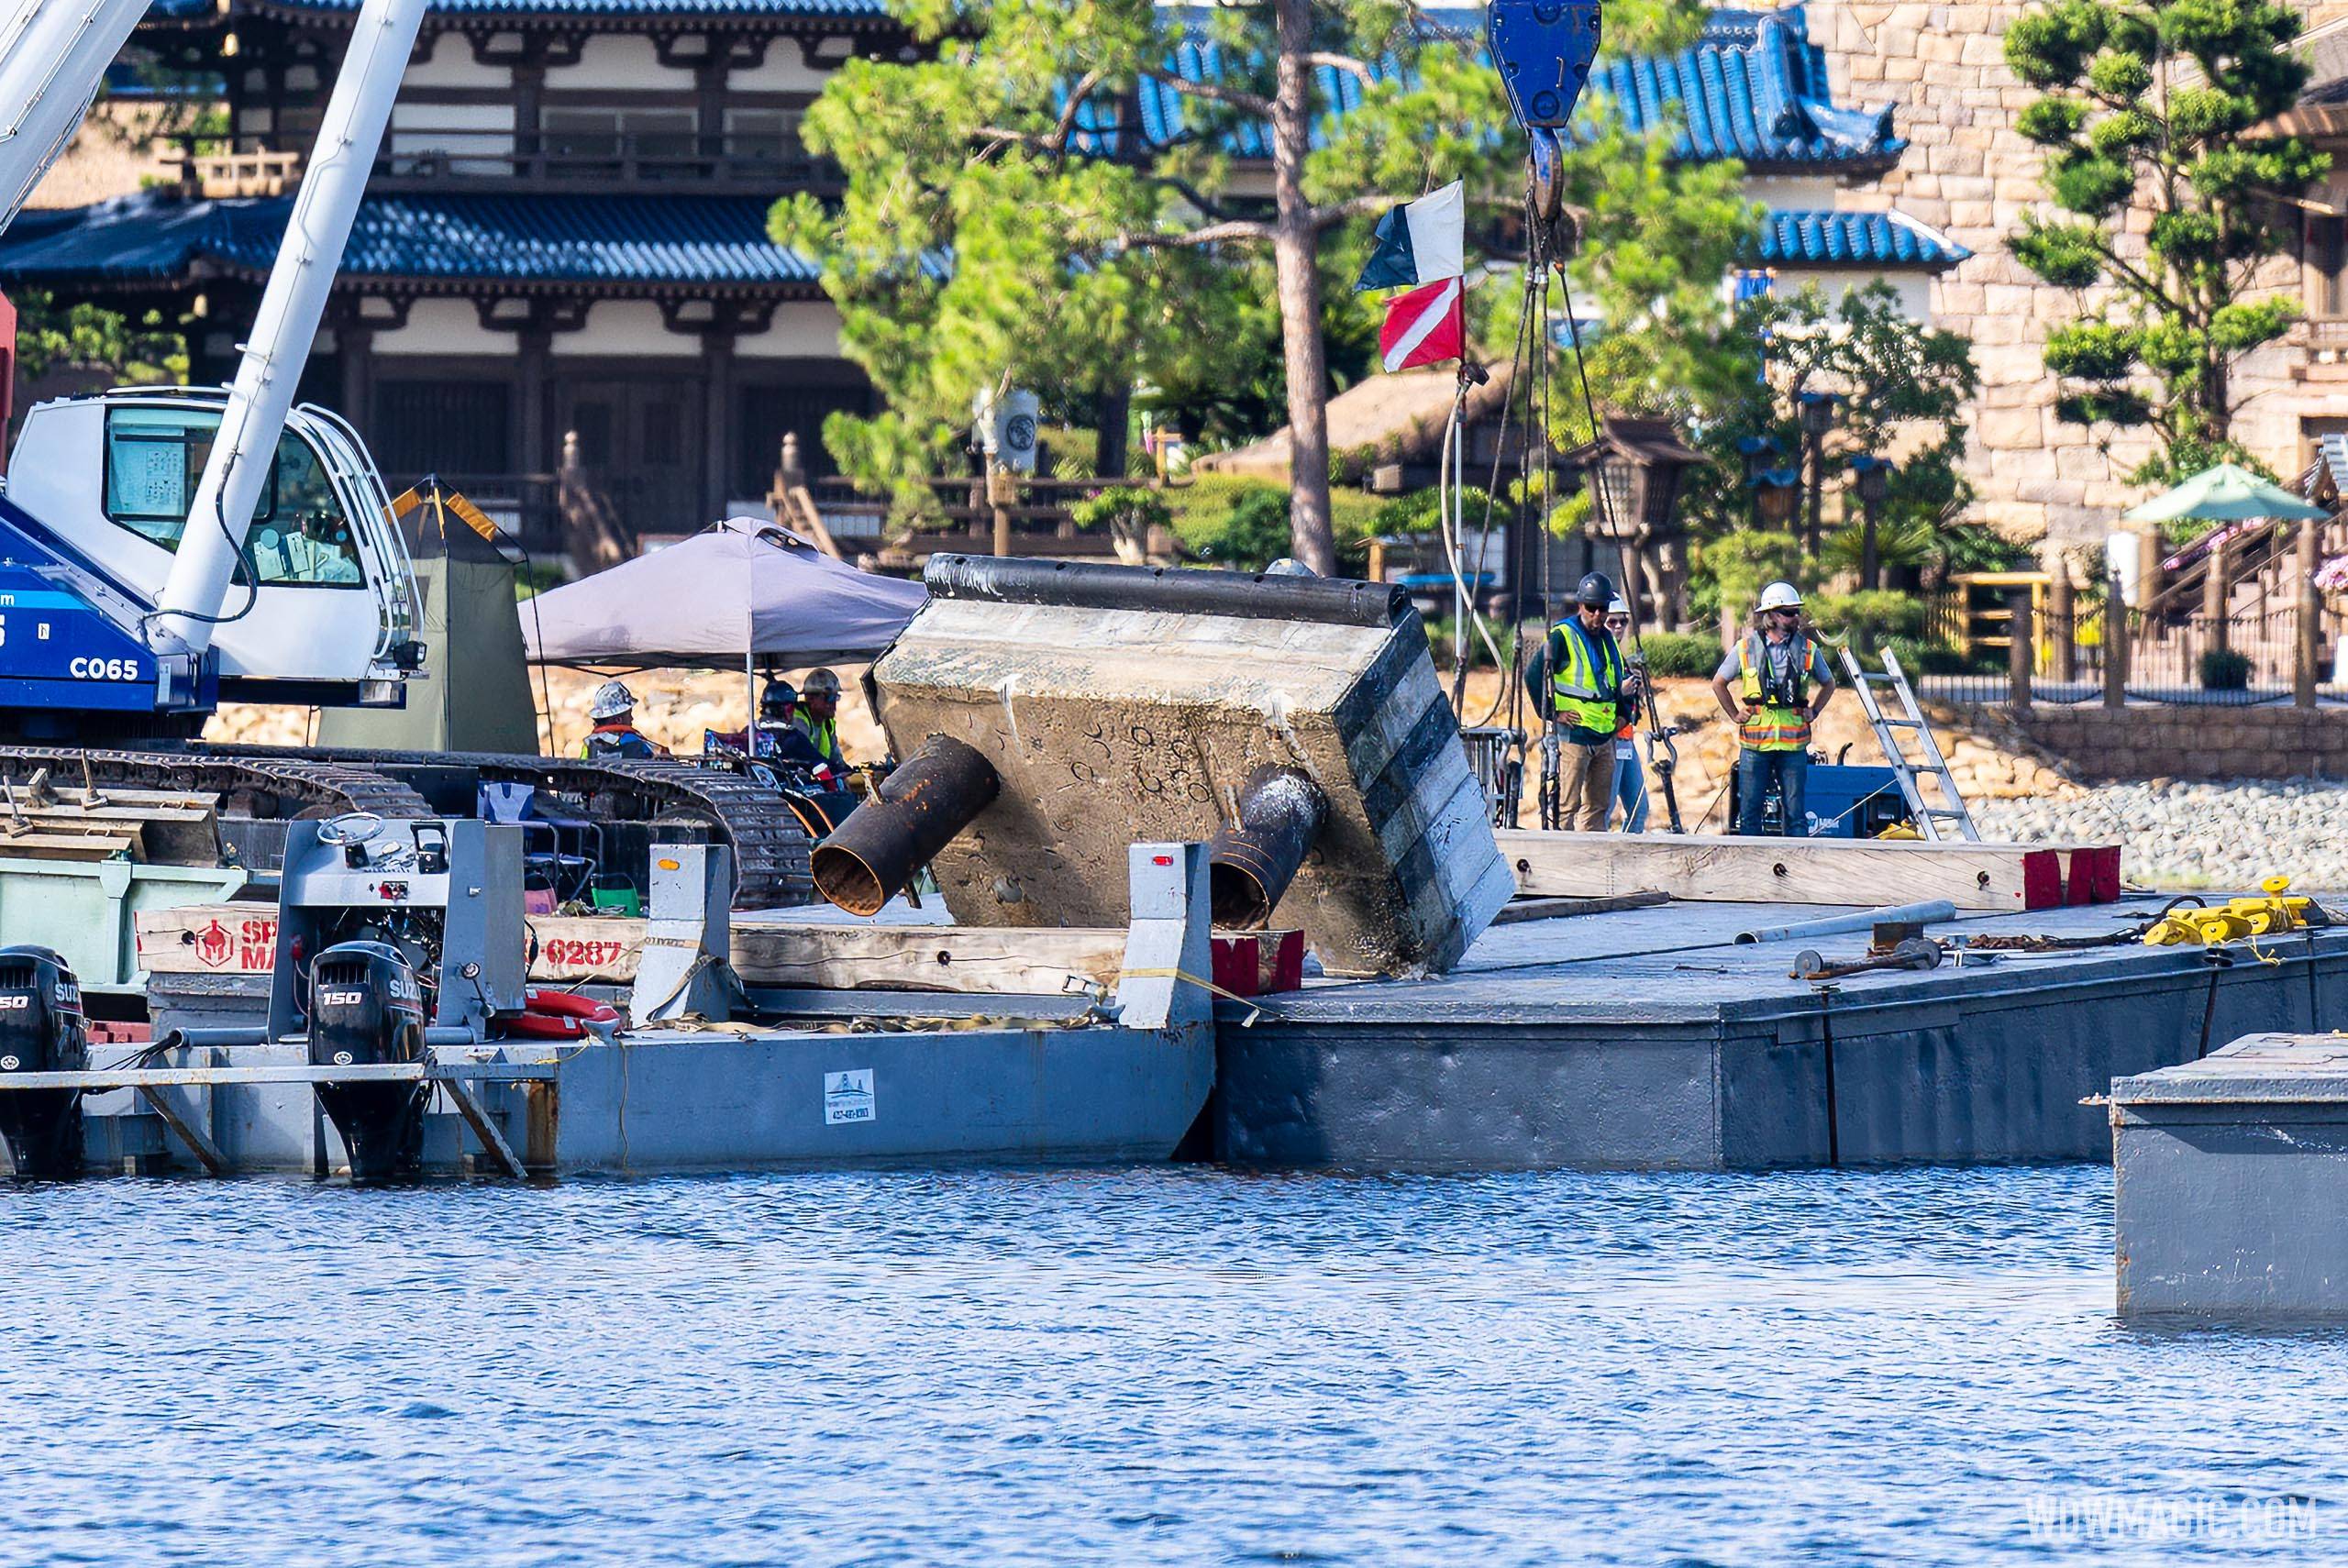 EPCOT's retired Harmonious sees lagoon dock removal as part of plans for new spectacular